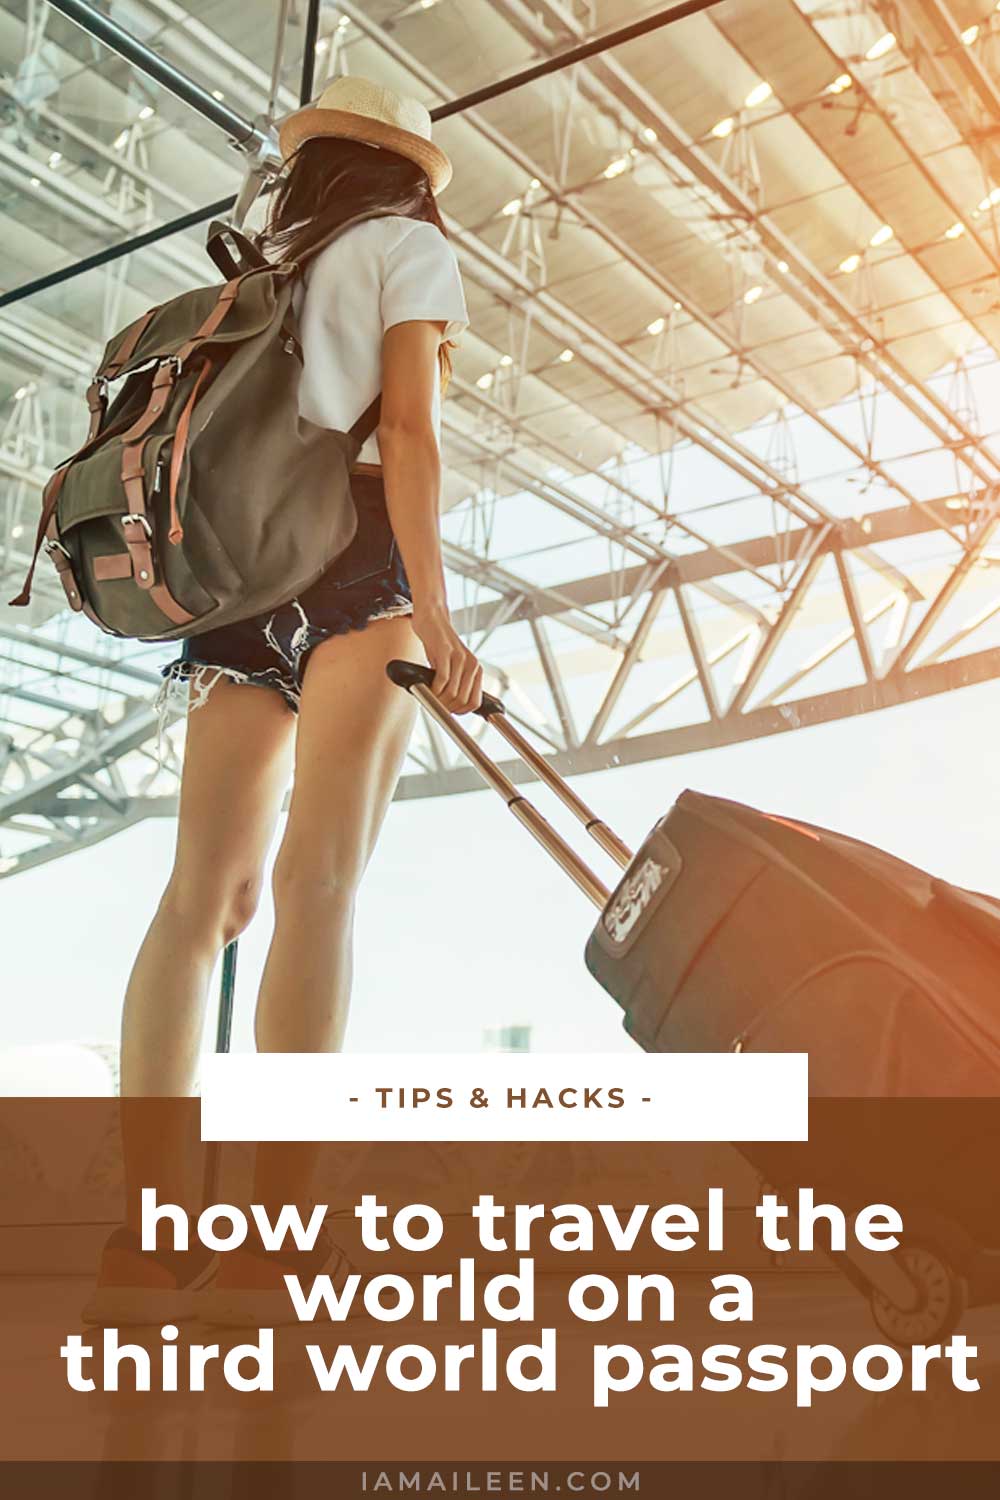 How to Travel the World on a Third World Passport (It's Possible With These Tips!)